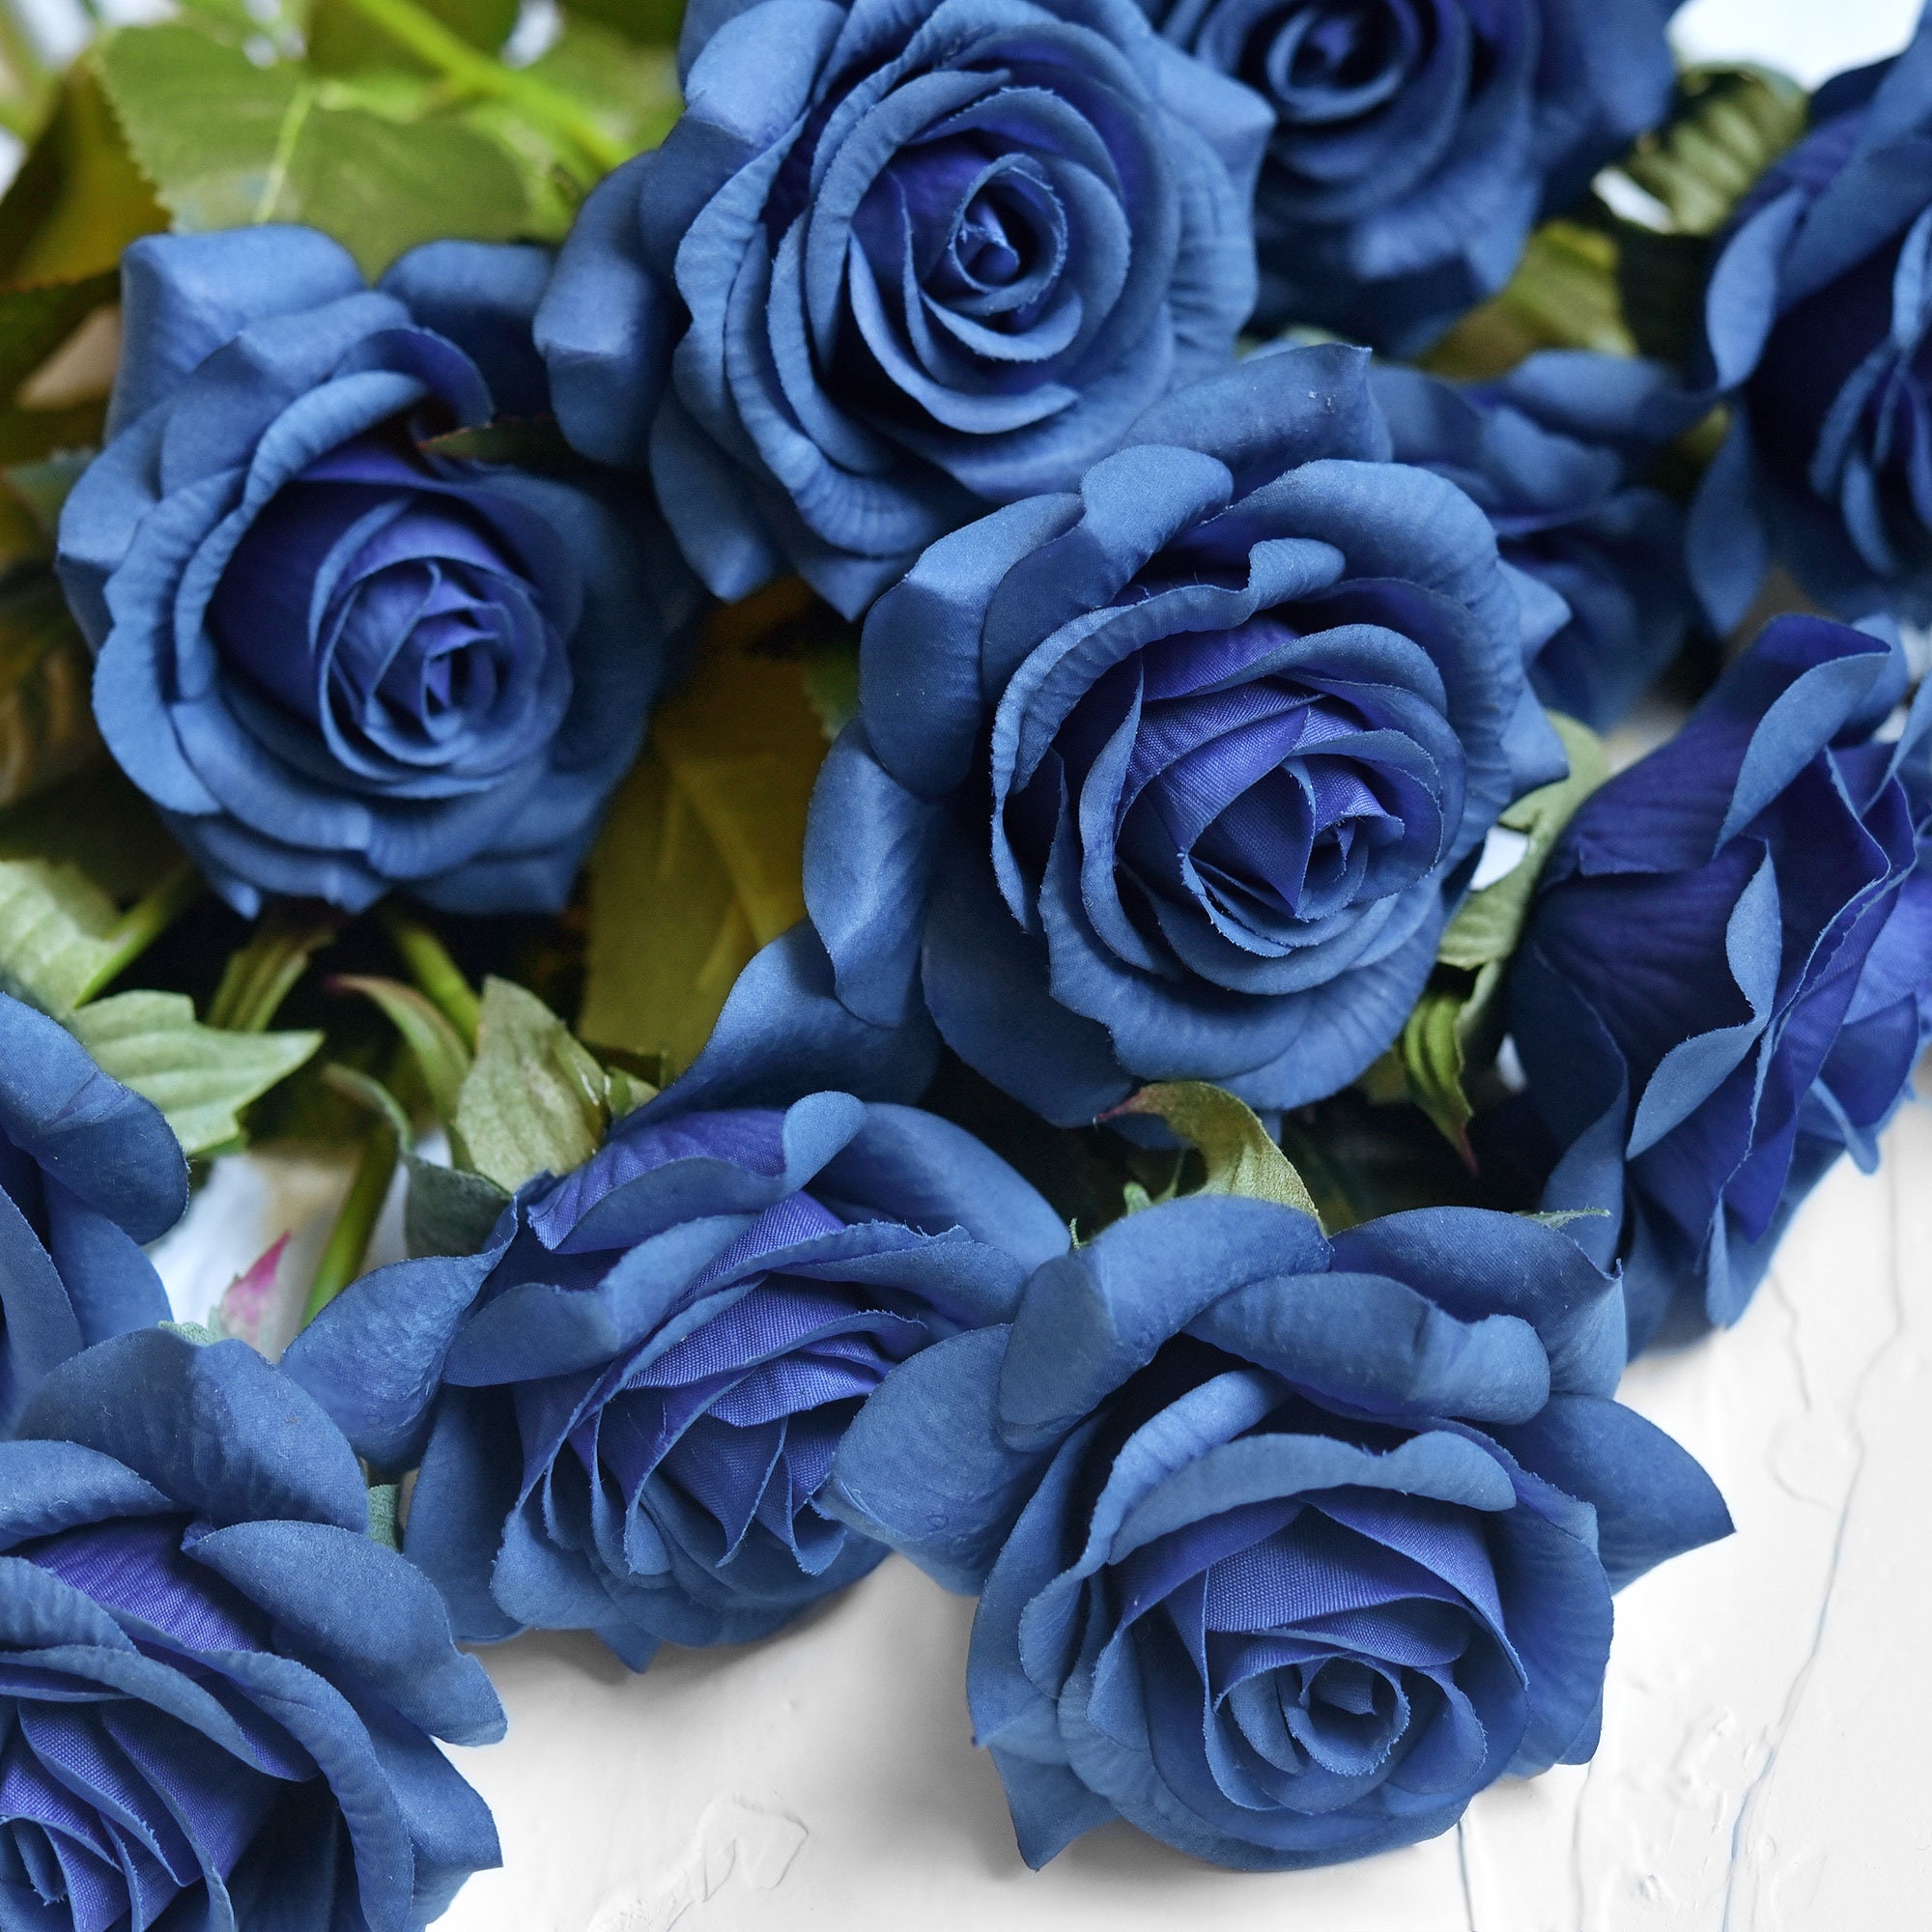 Royal Blue Real Touch Roses Silk Artificial Flowers petals Feel and Look  Like Fresh Roses' 10 Stems Fiveseasonstuff Floral -  Canada